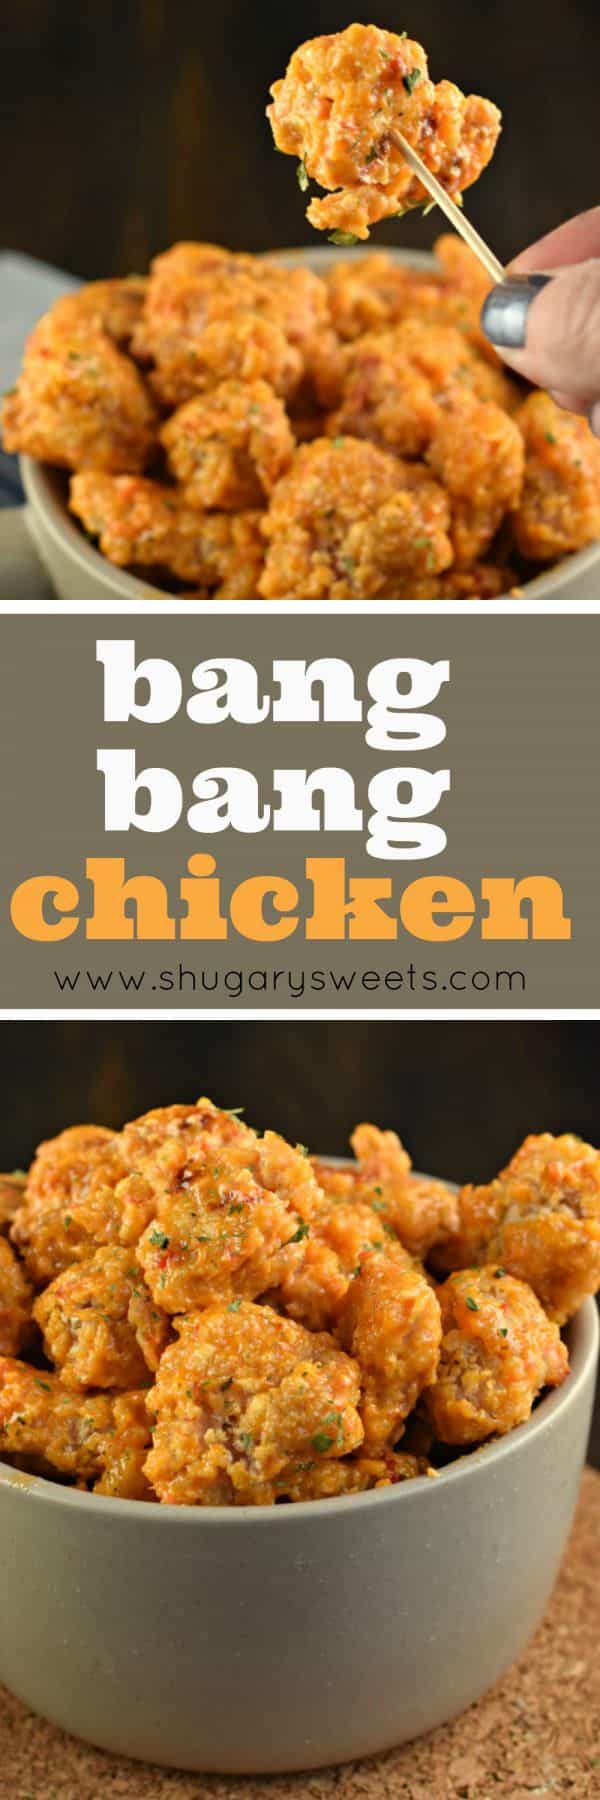 Bang Bang Chicken is an easy, weeknight dinner idea with a tangy, yet sweet sauce! This recipe calls for baking NOT frying the chicken, easy clean up!